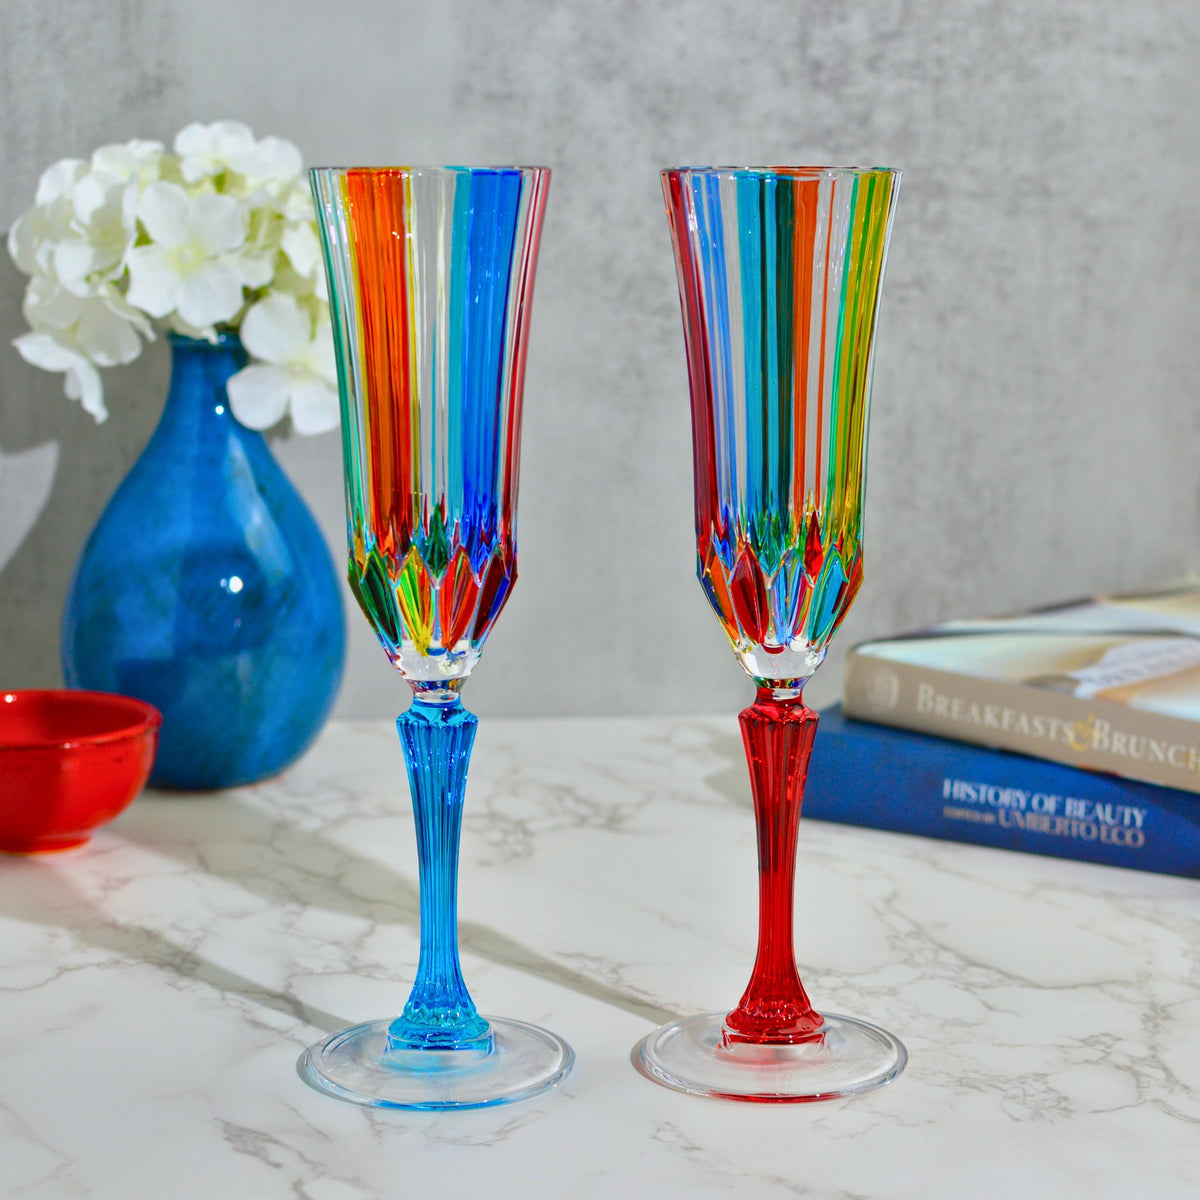 Swatch Champagne Glasses, Set of 2 Made in Italy - My Italian Decor